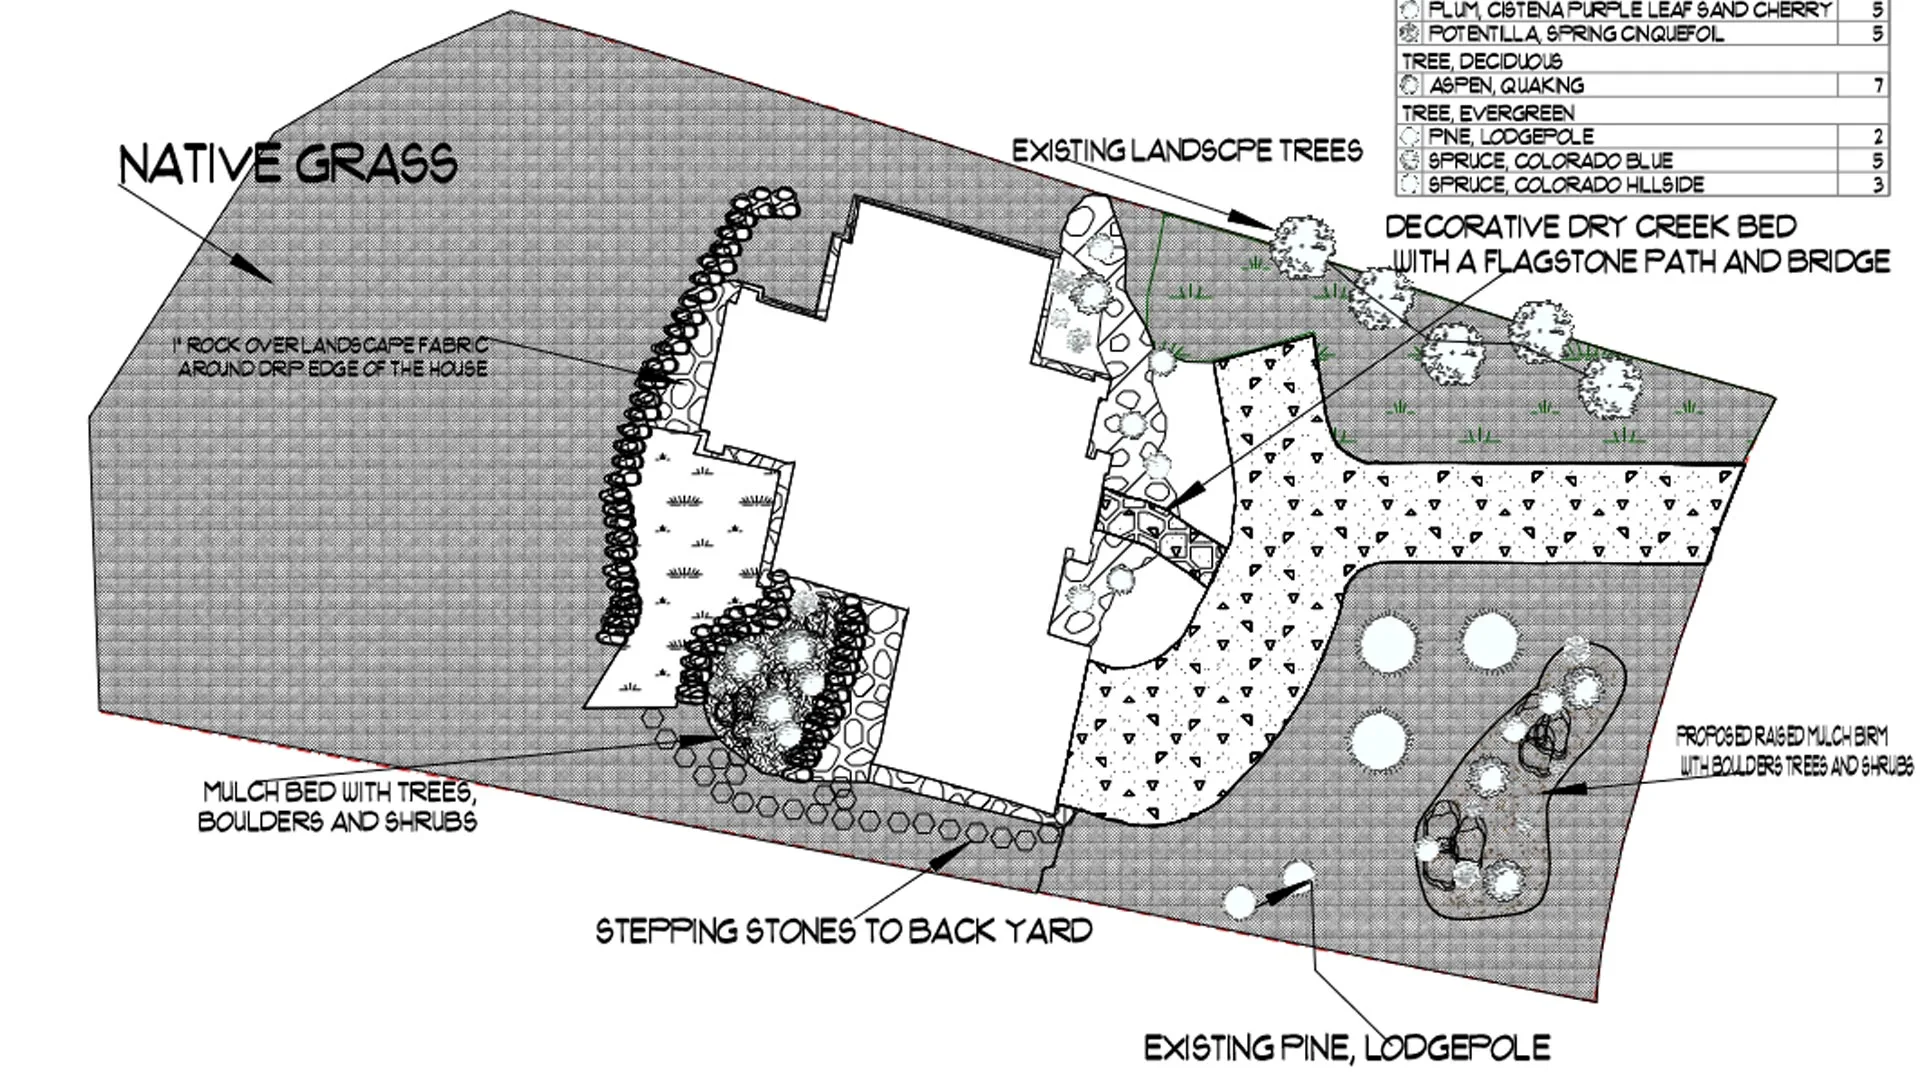 Design rendering for a new landscape project at a home in Tabernash, CO.